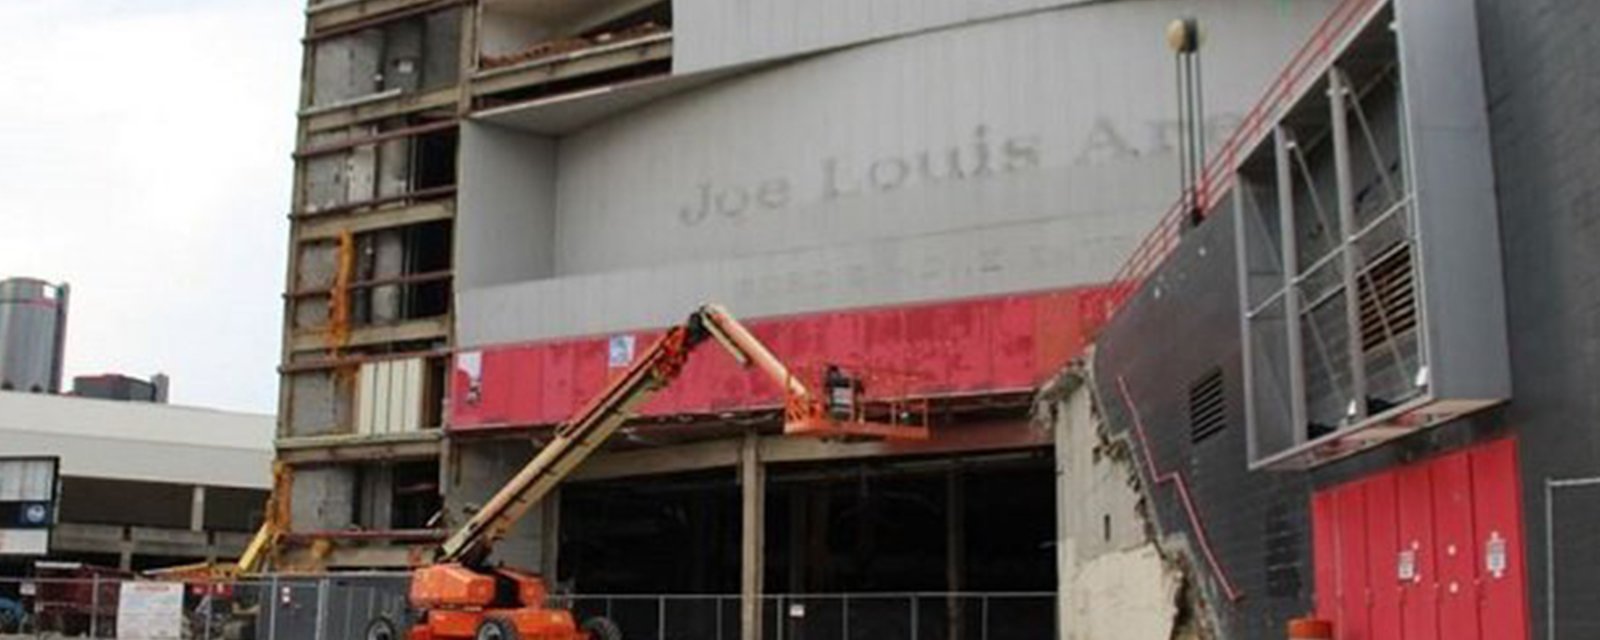 Latest photos of a gutted Joe Louis Arena are heartbreaking